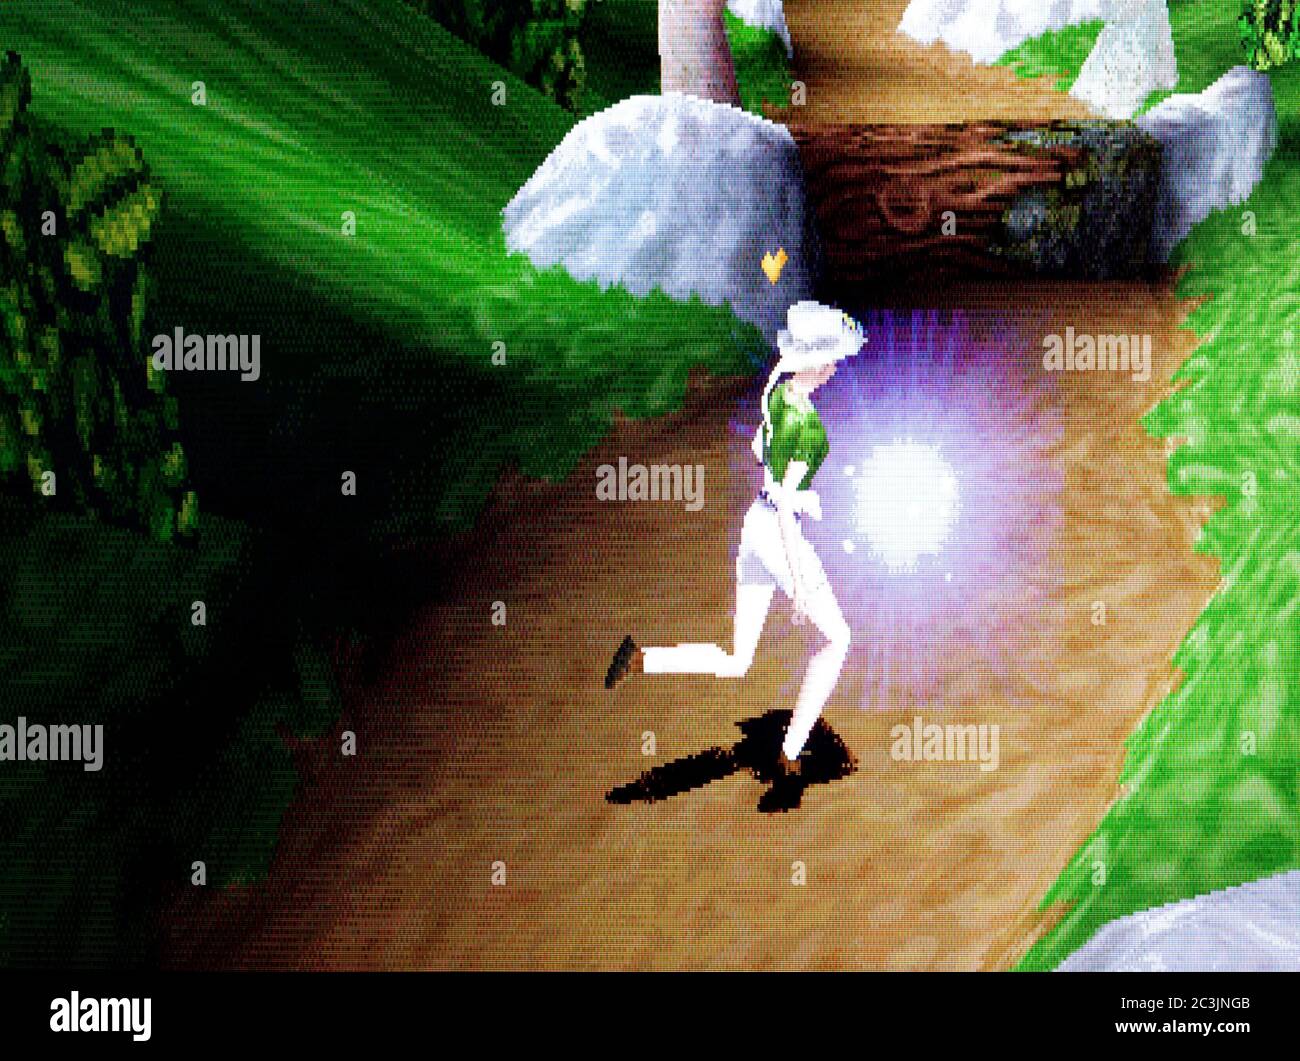 Barbie Explorer - Sony Playstation 1 PS1 PSX - Editorial use only Stock  Photo - Alamy